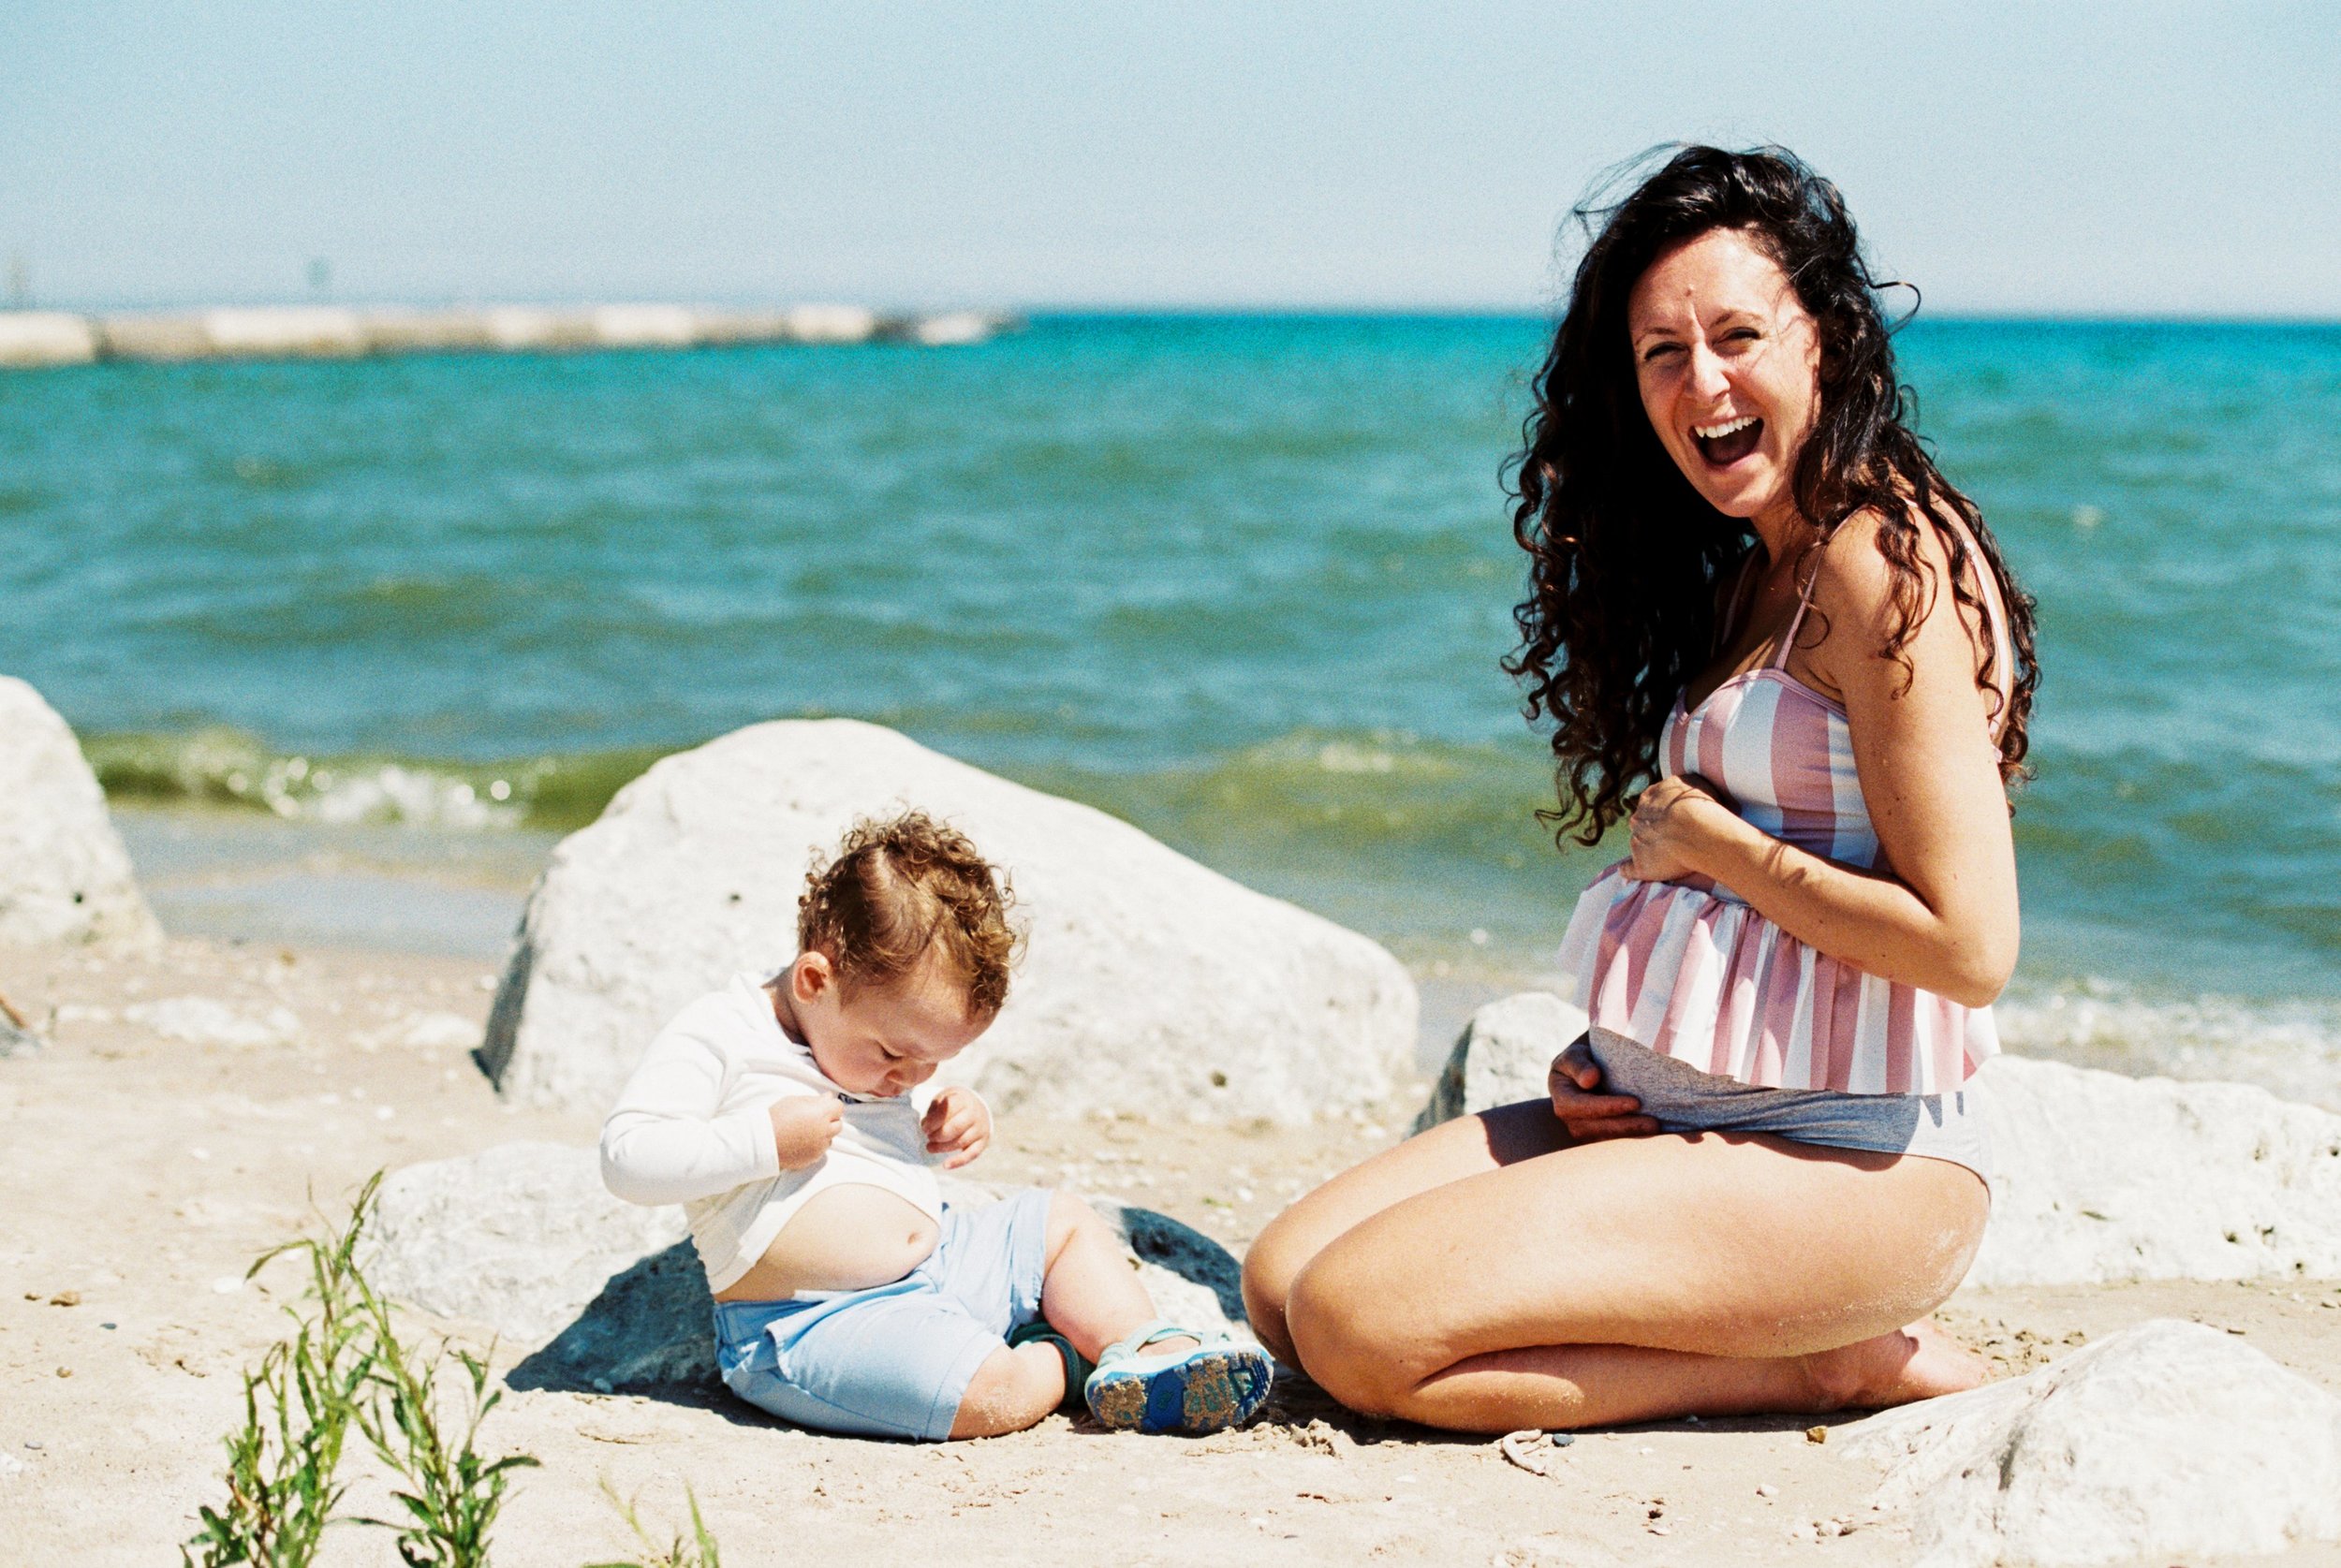 Lake Michigan Summer Beach Pregnant Mother and Baby by Seattle Lifestyle Portrait Photographer Janelle Elaine Photography on film.jpg